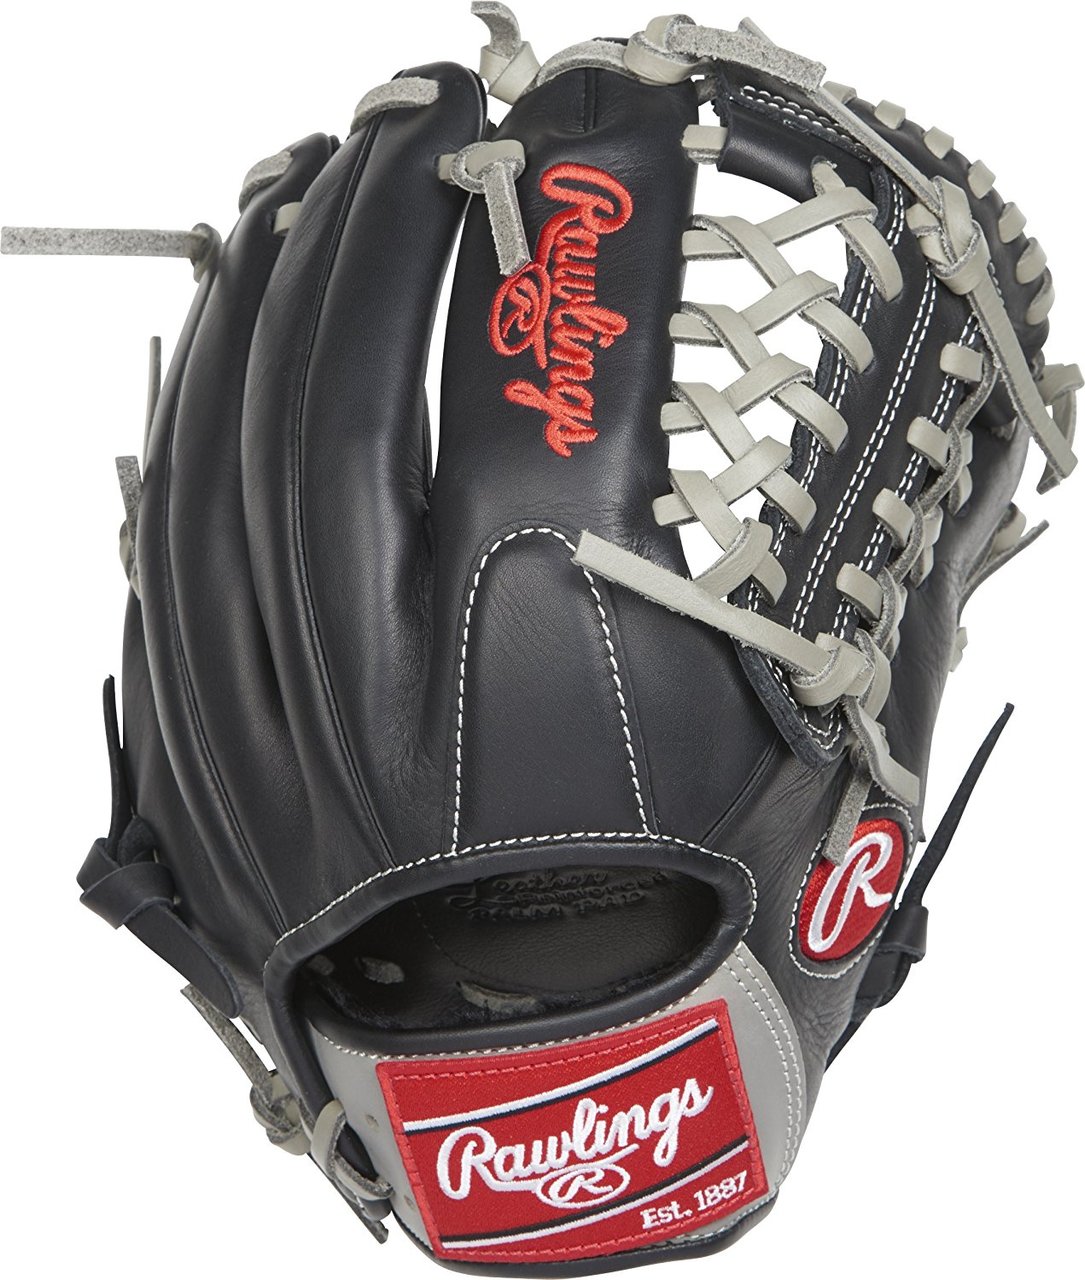 rawlings-gamer-g204-2bg-baseball-glove-11-5-right-hand-throw G204-4BG-RightHandThrow Rawlings 083321376443 The top selling Gamer™ Series models are taking on a new